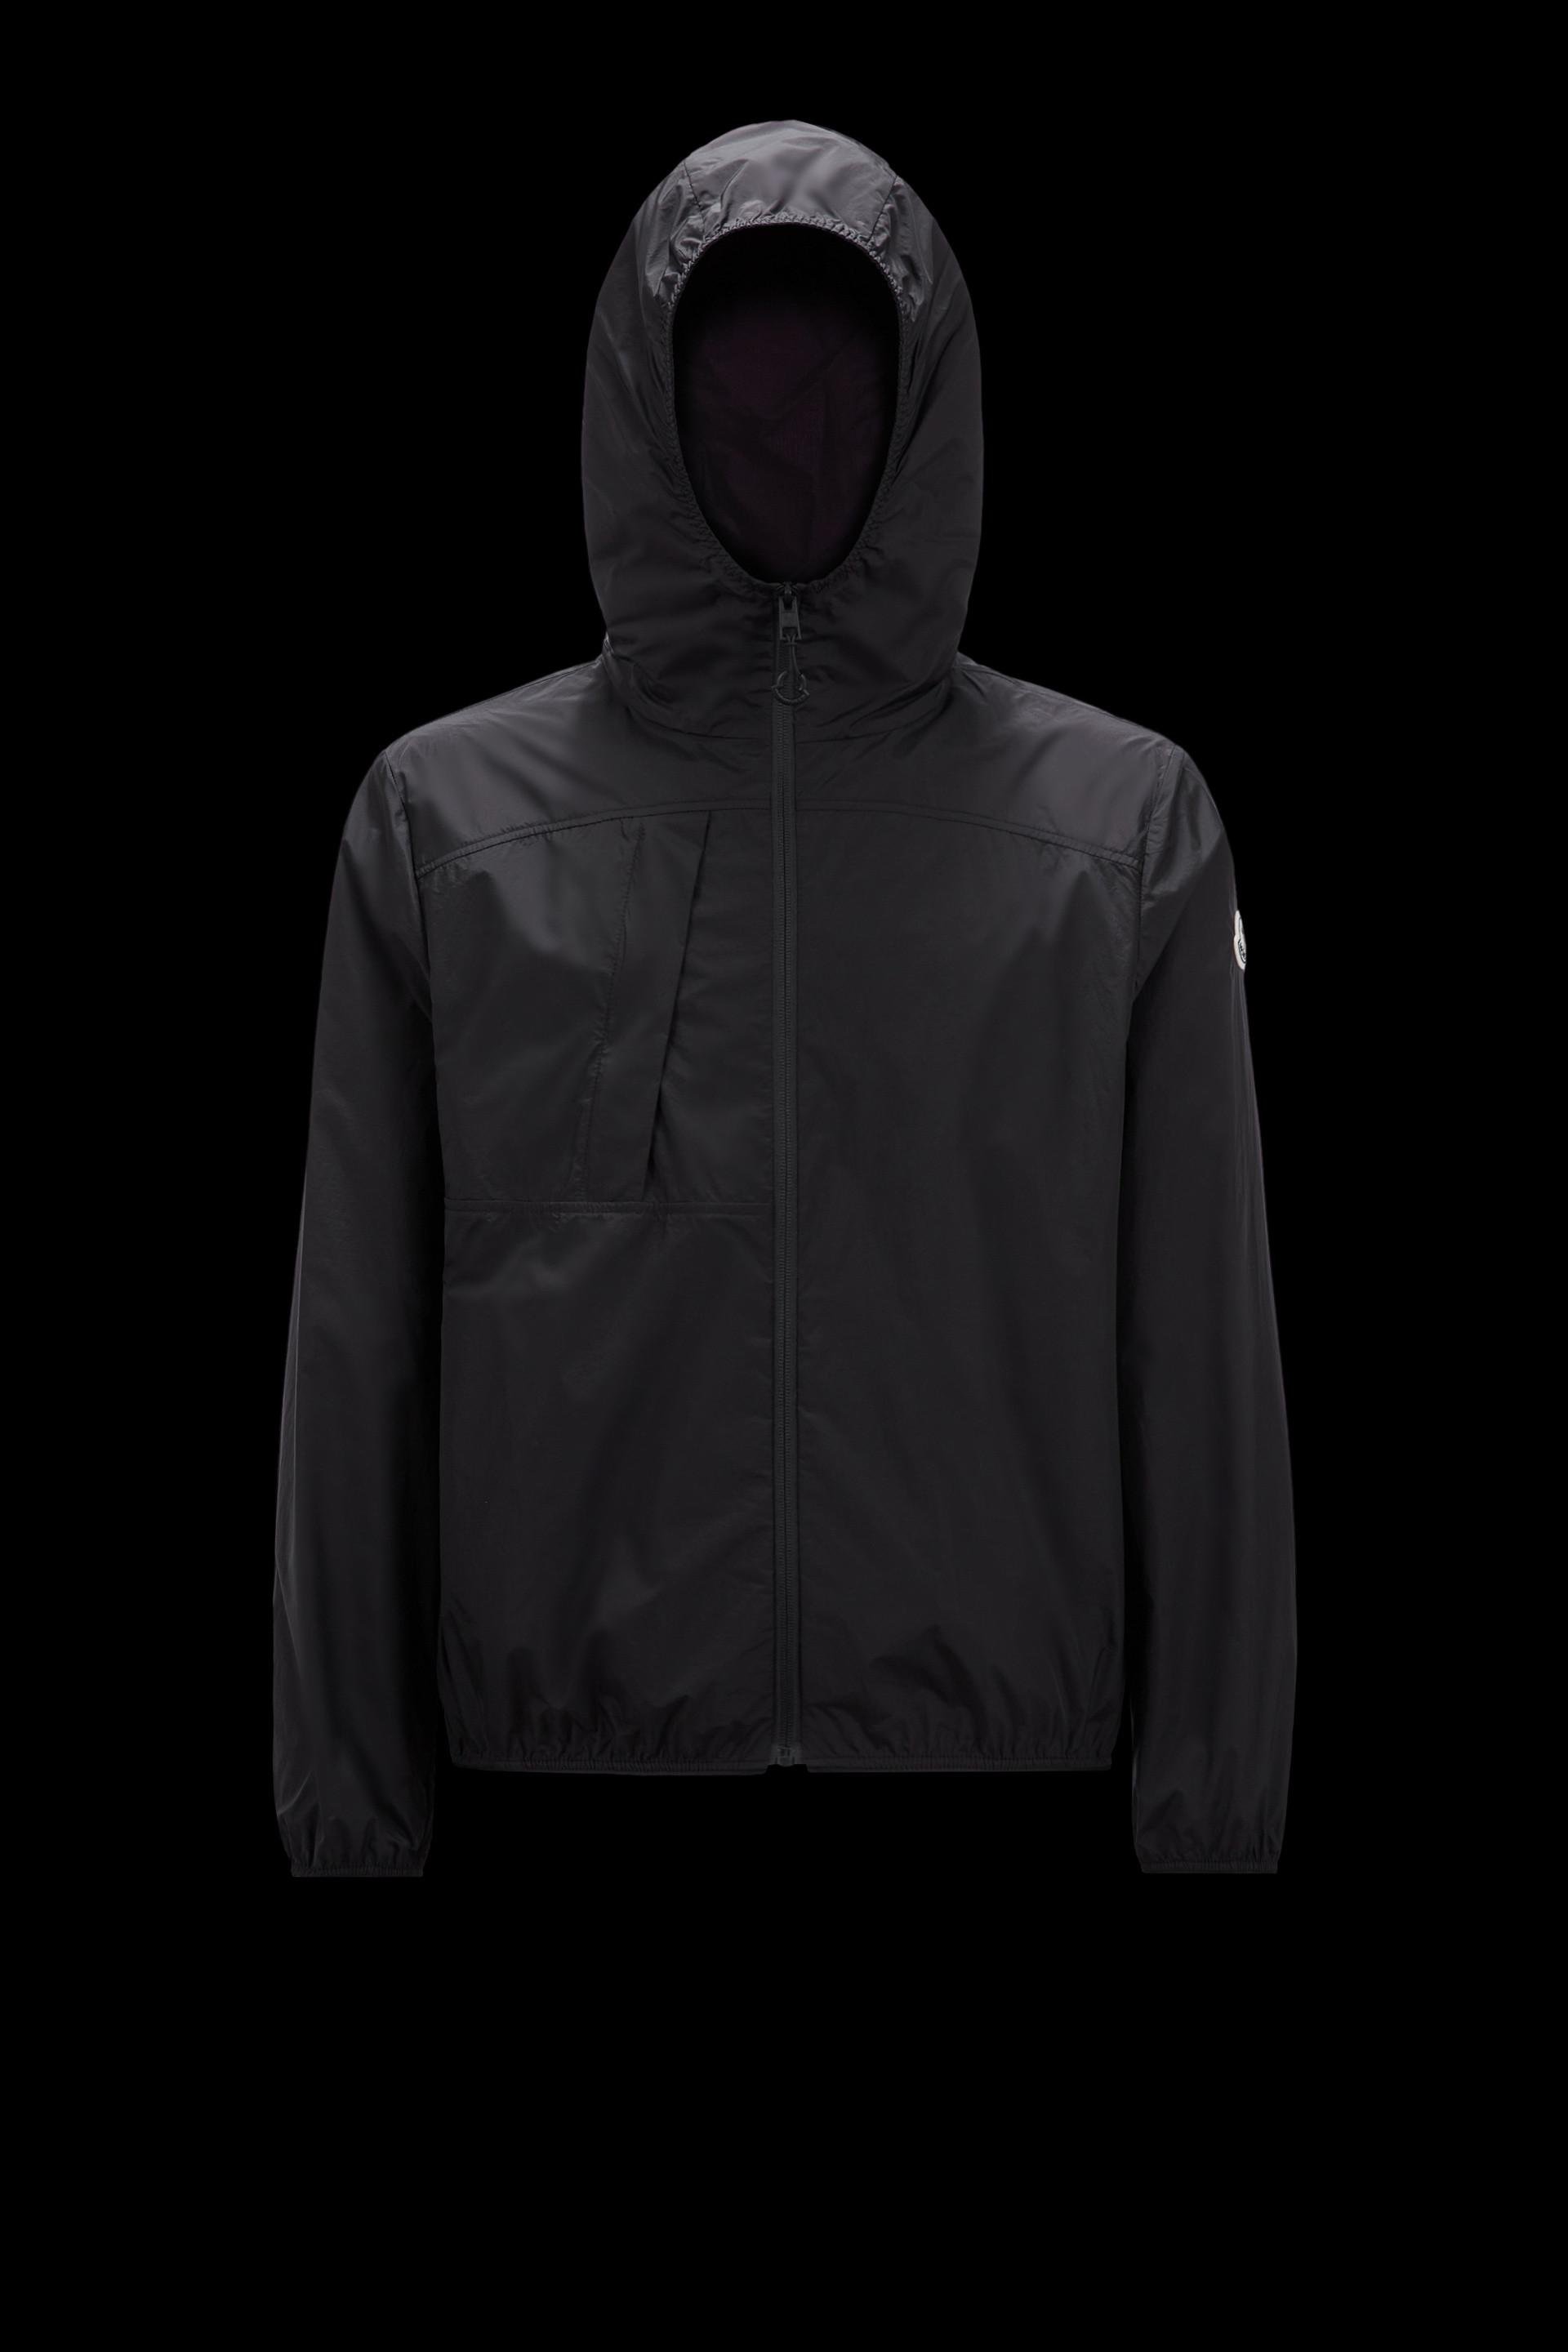 Haadrin Hooded Jacket by MONCLER